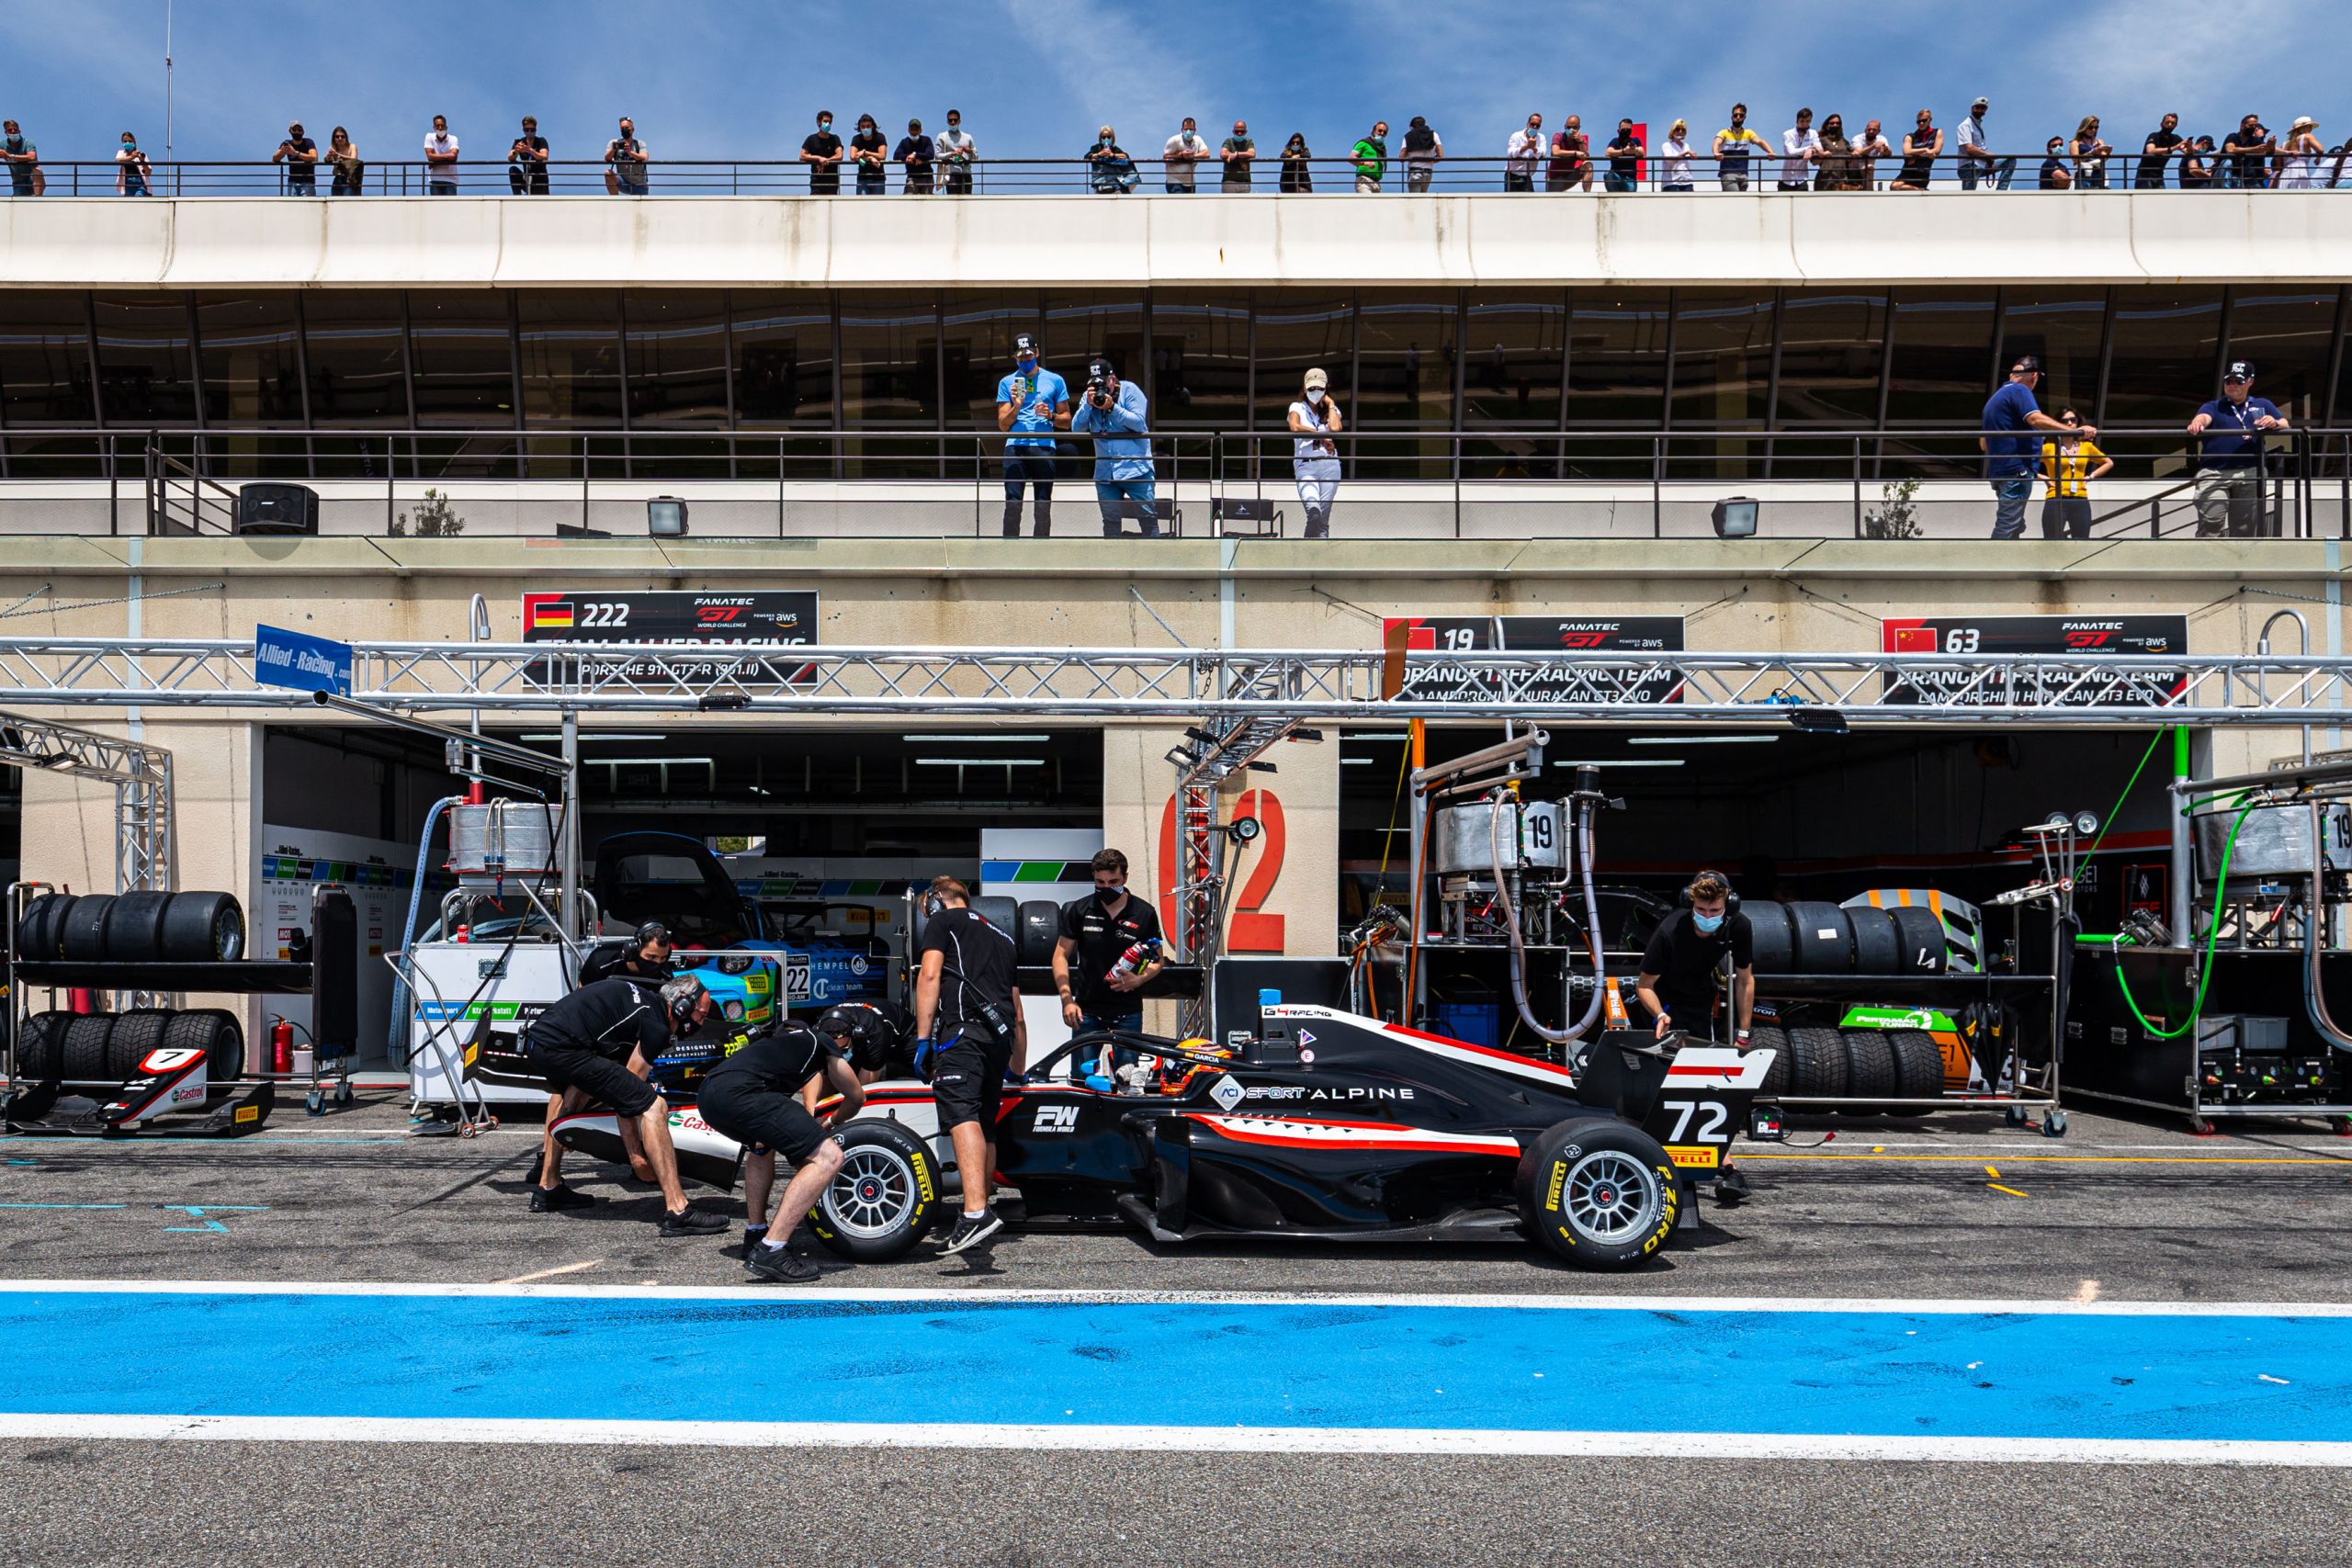 Promising start turns into nightmare for G4 racing in Le Castellet